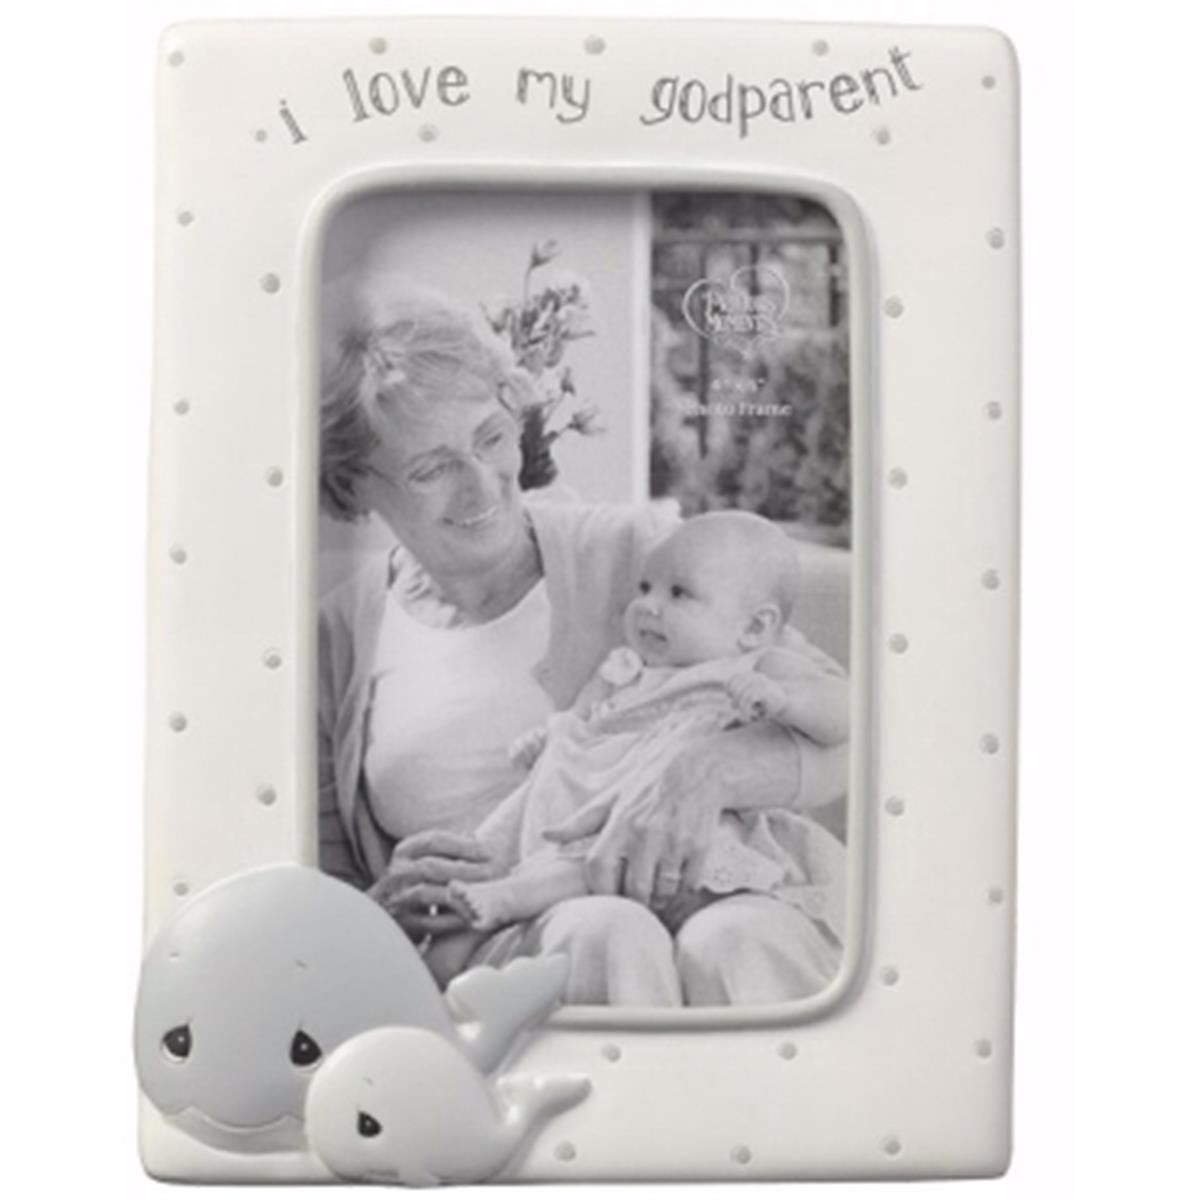 156265 I Love My Godparent Photo Frame, Holds 4 X 6 In. Photo